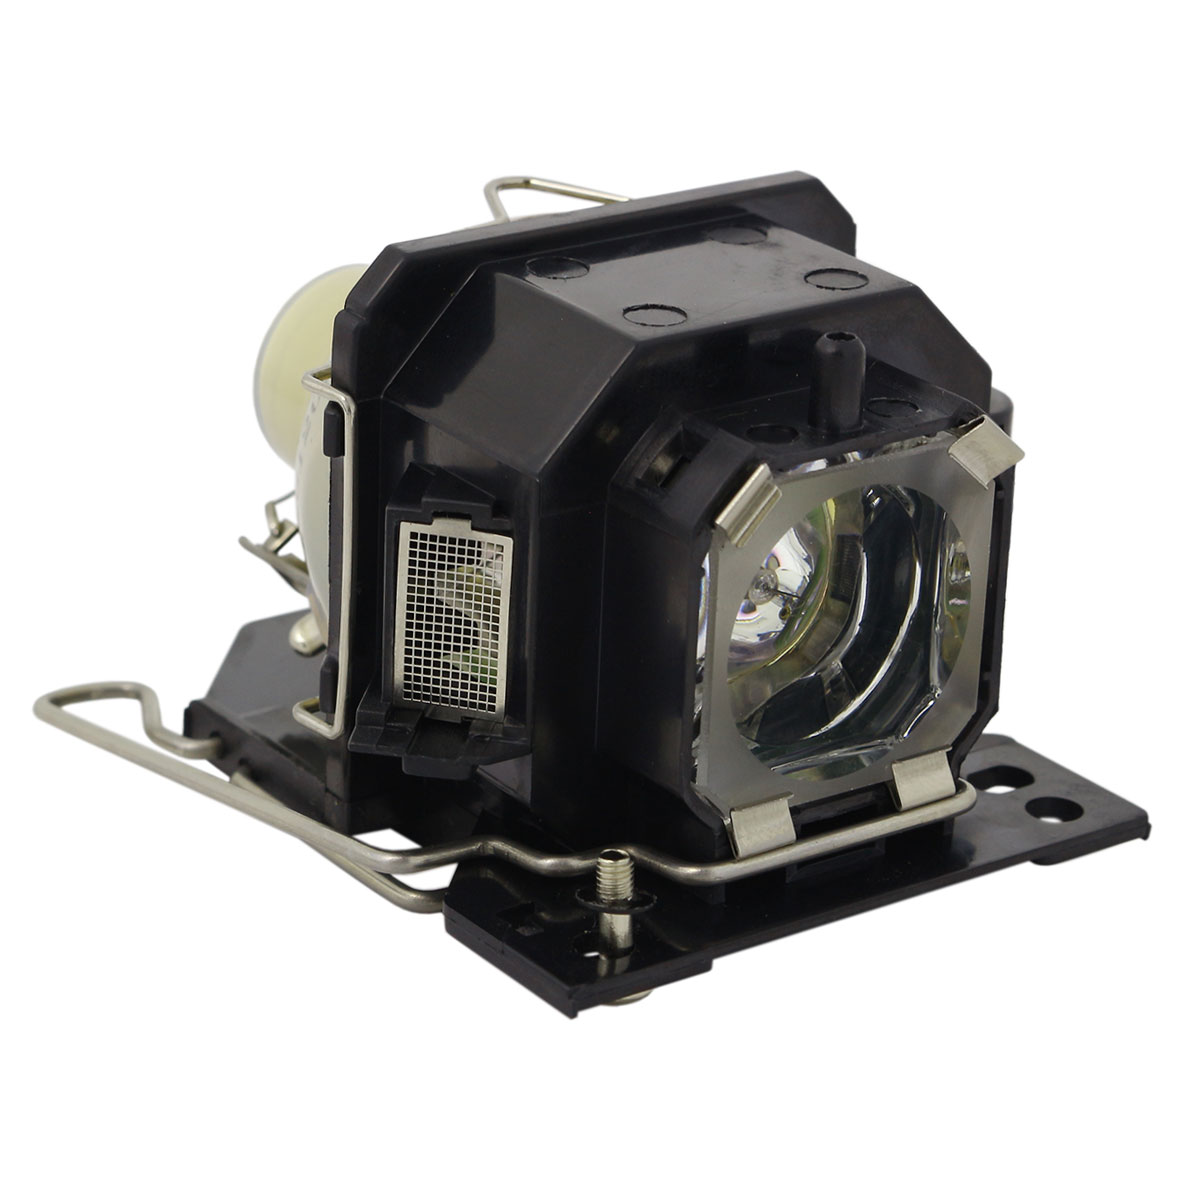 OEM DT00781 Replacement Lamp and Housing for Hitachi Projectors - image 3 of 6